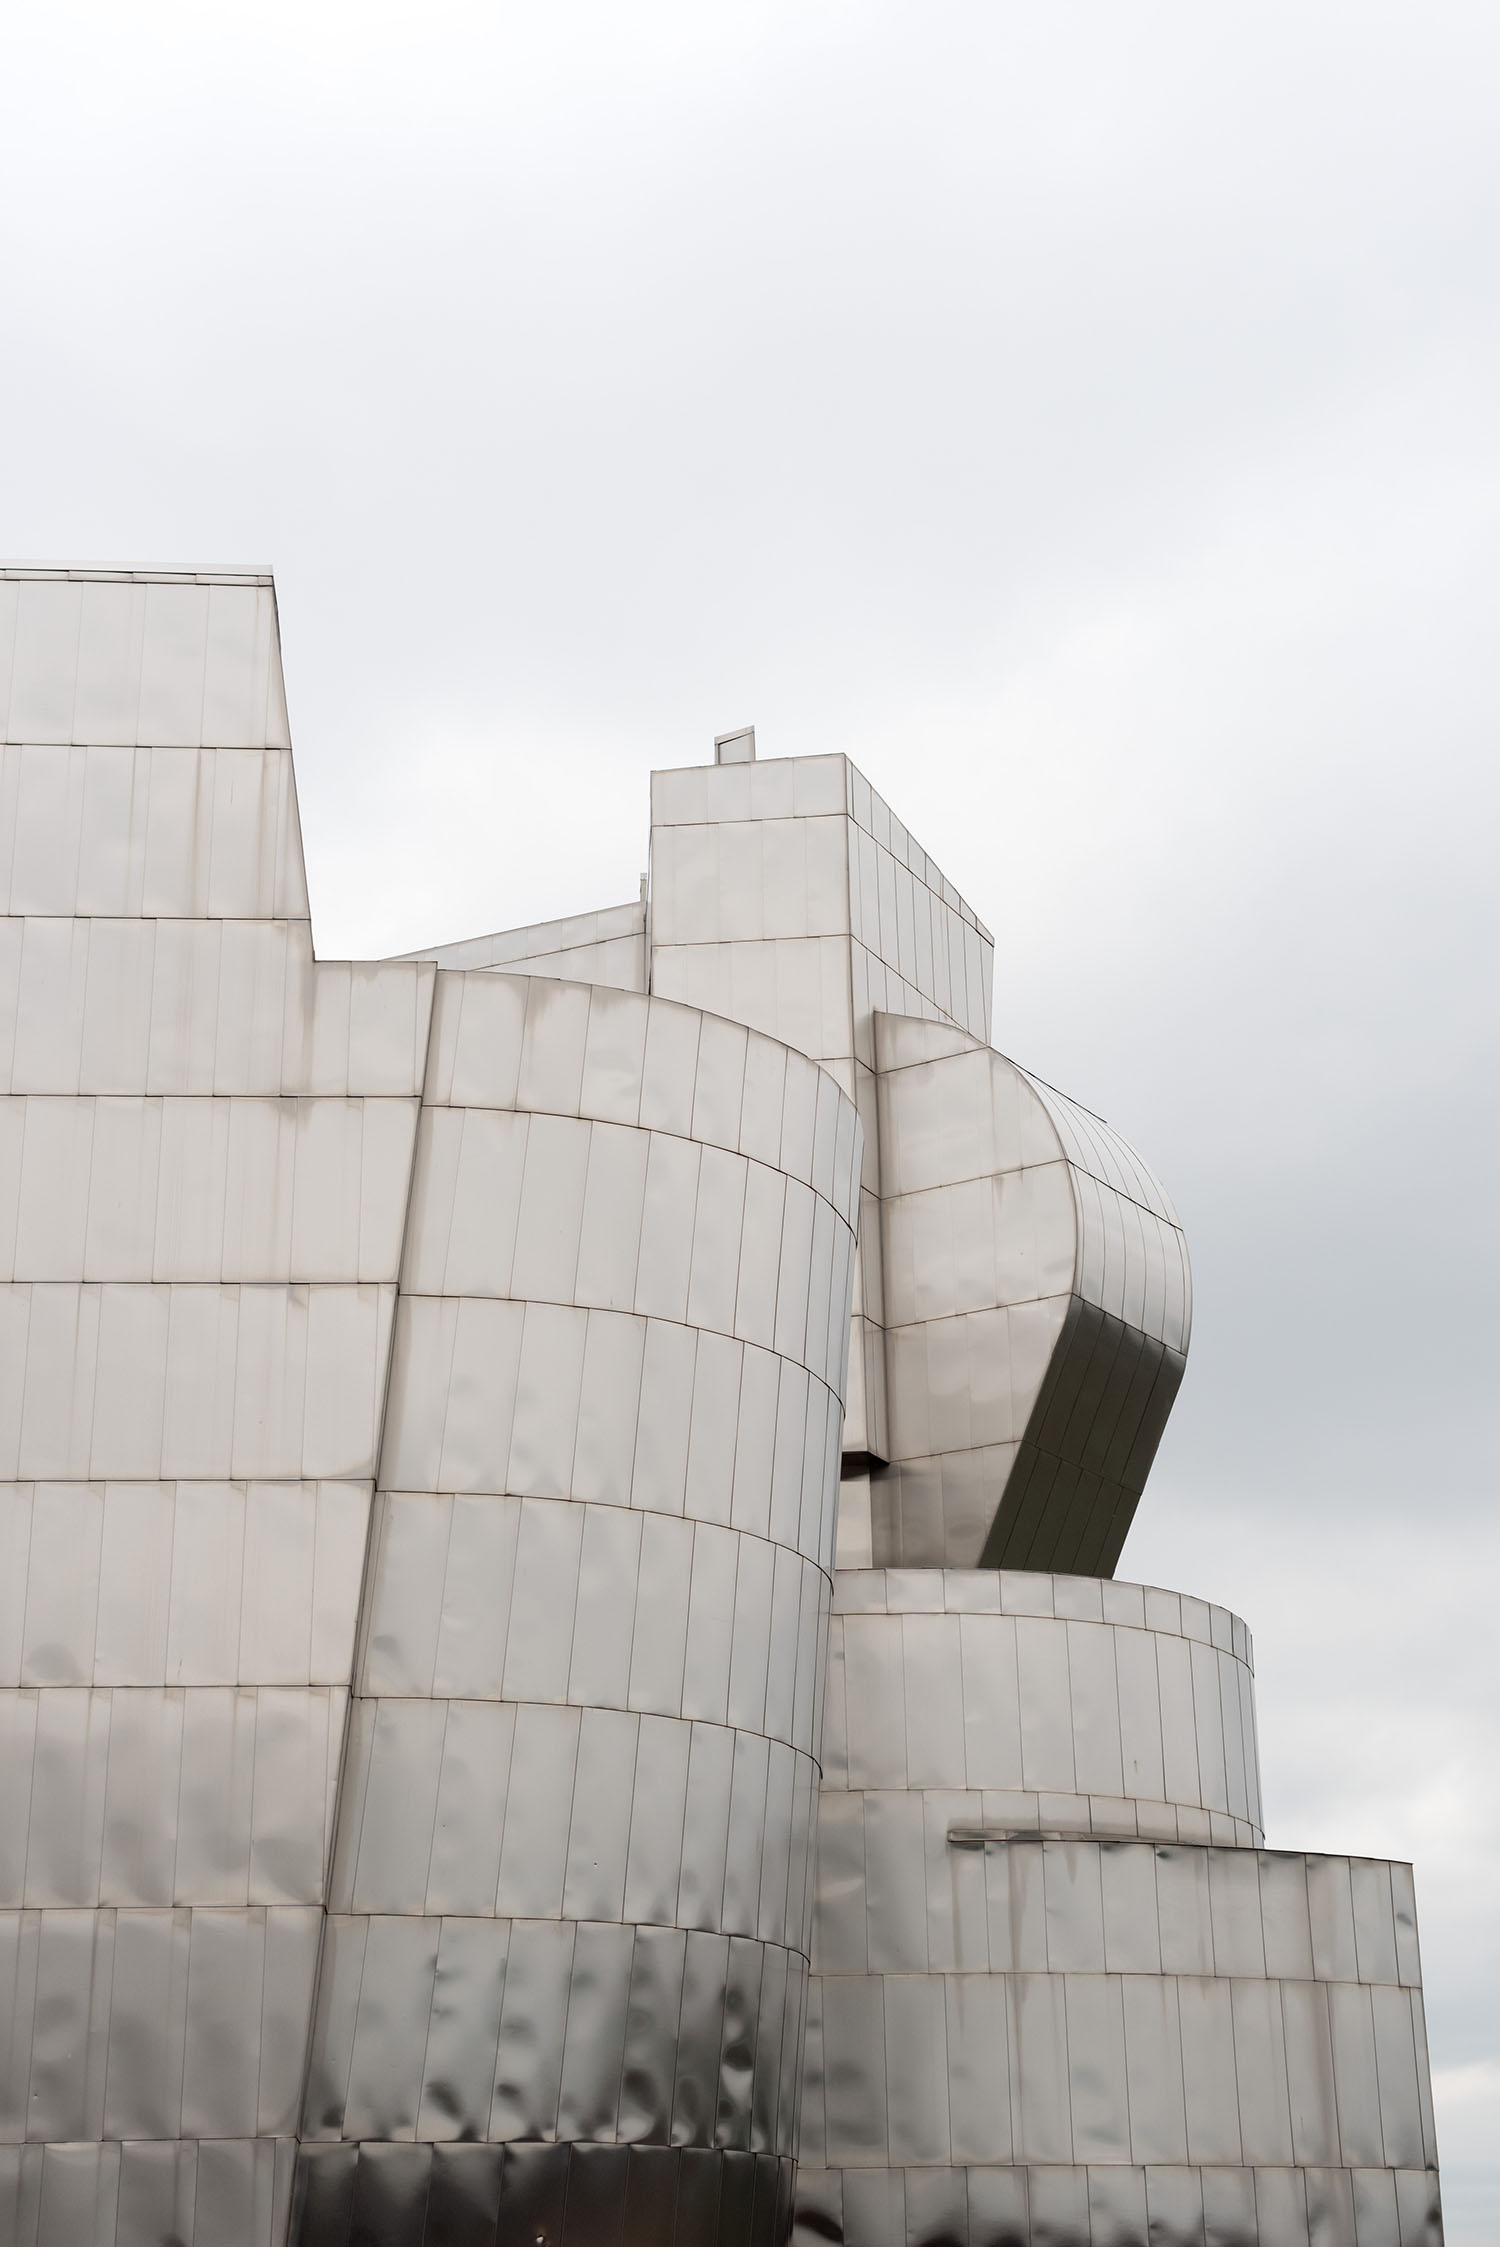 The Weisman Gallery, designed by Frank Gehry, and captured by top Winnipeg travel blogger Cee Fardoe of Coco & Vera